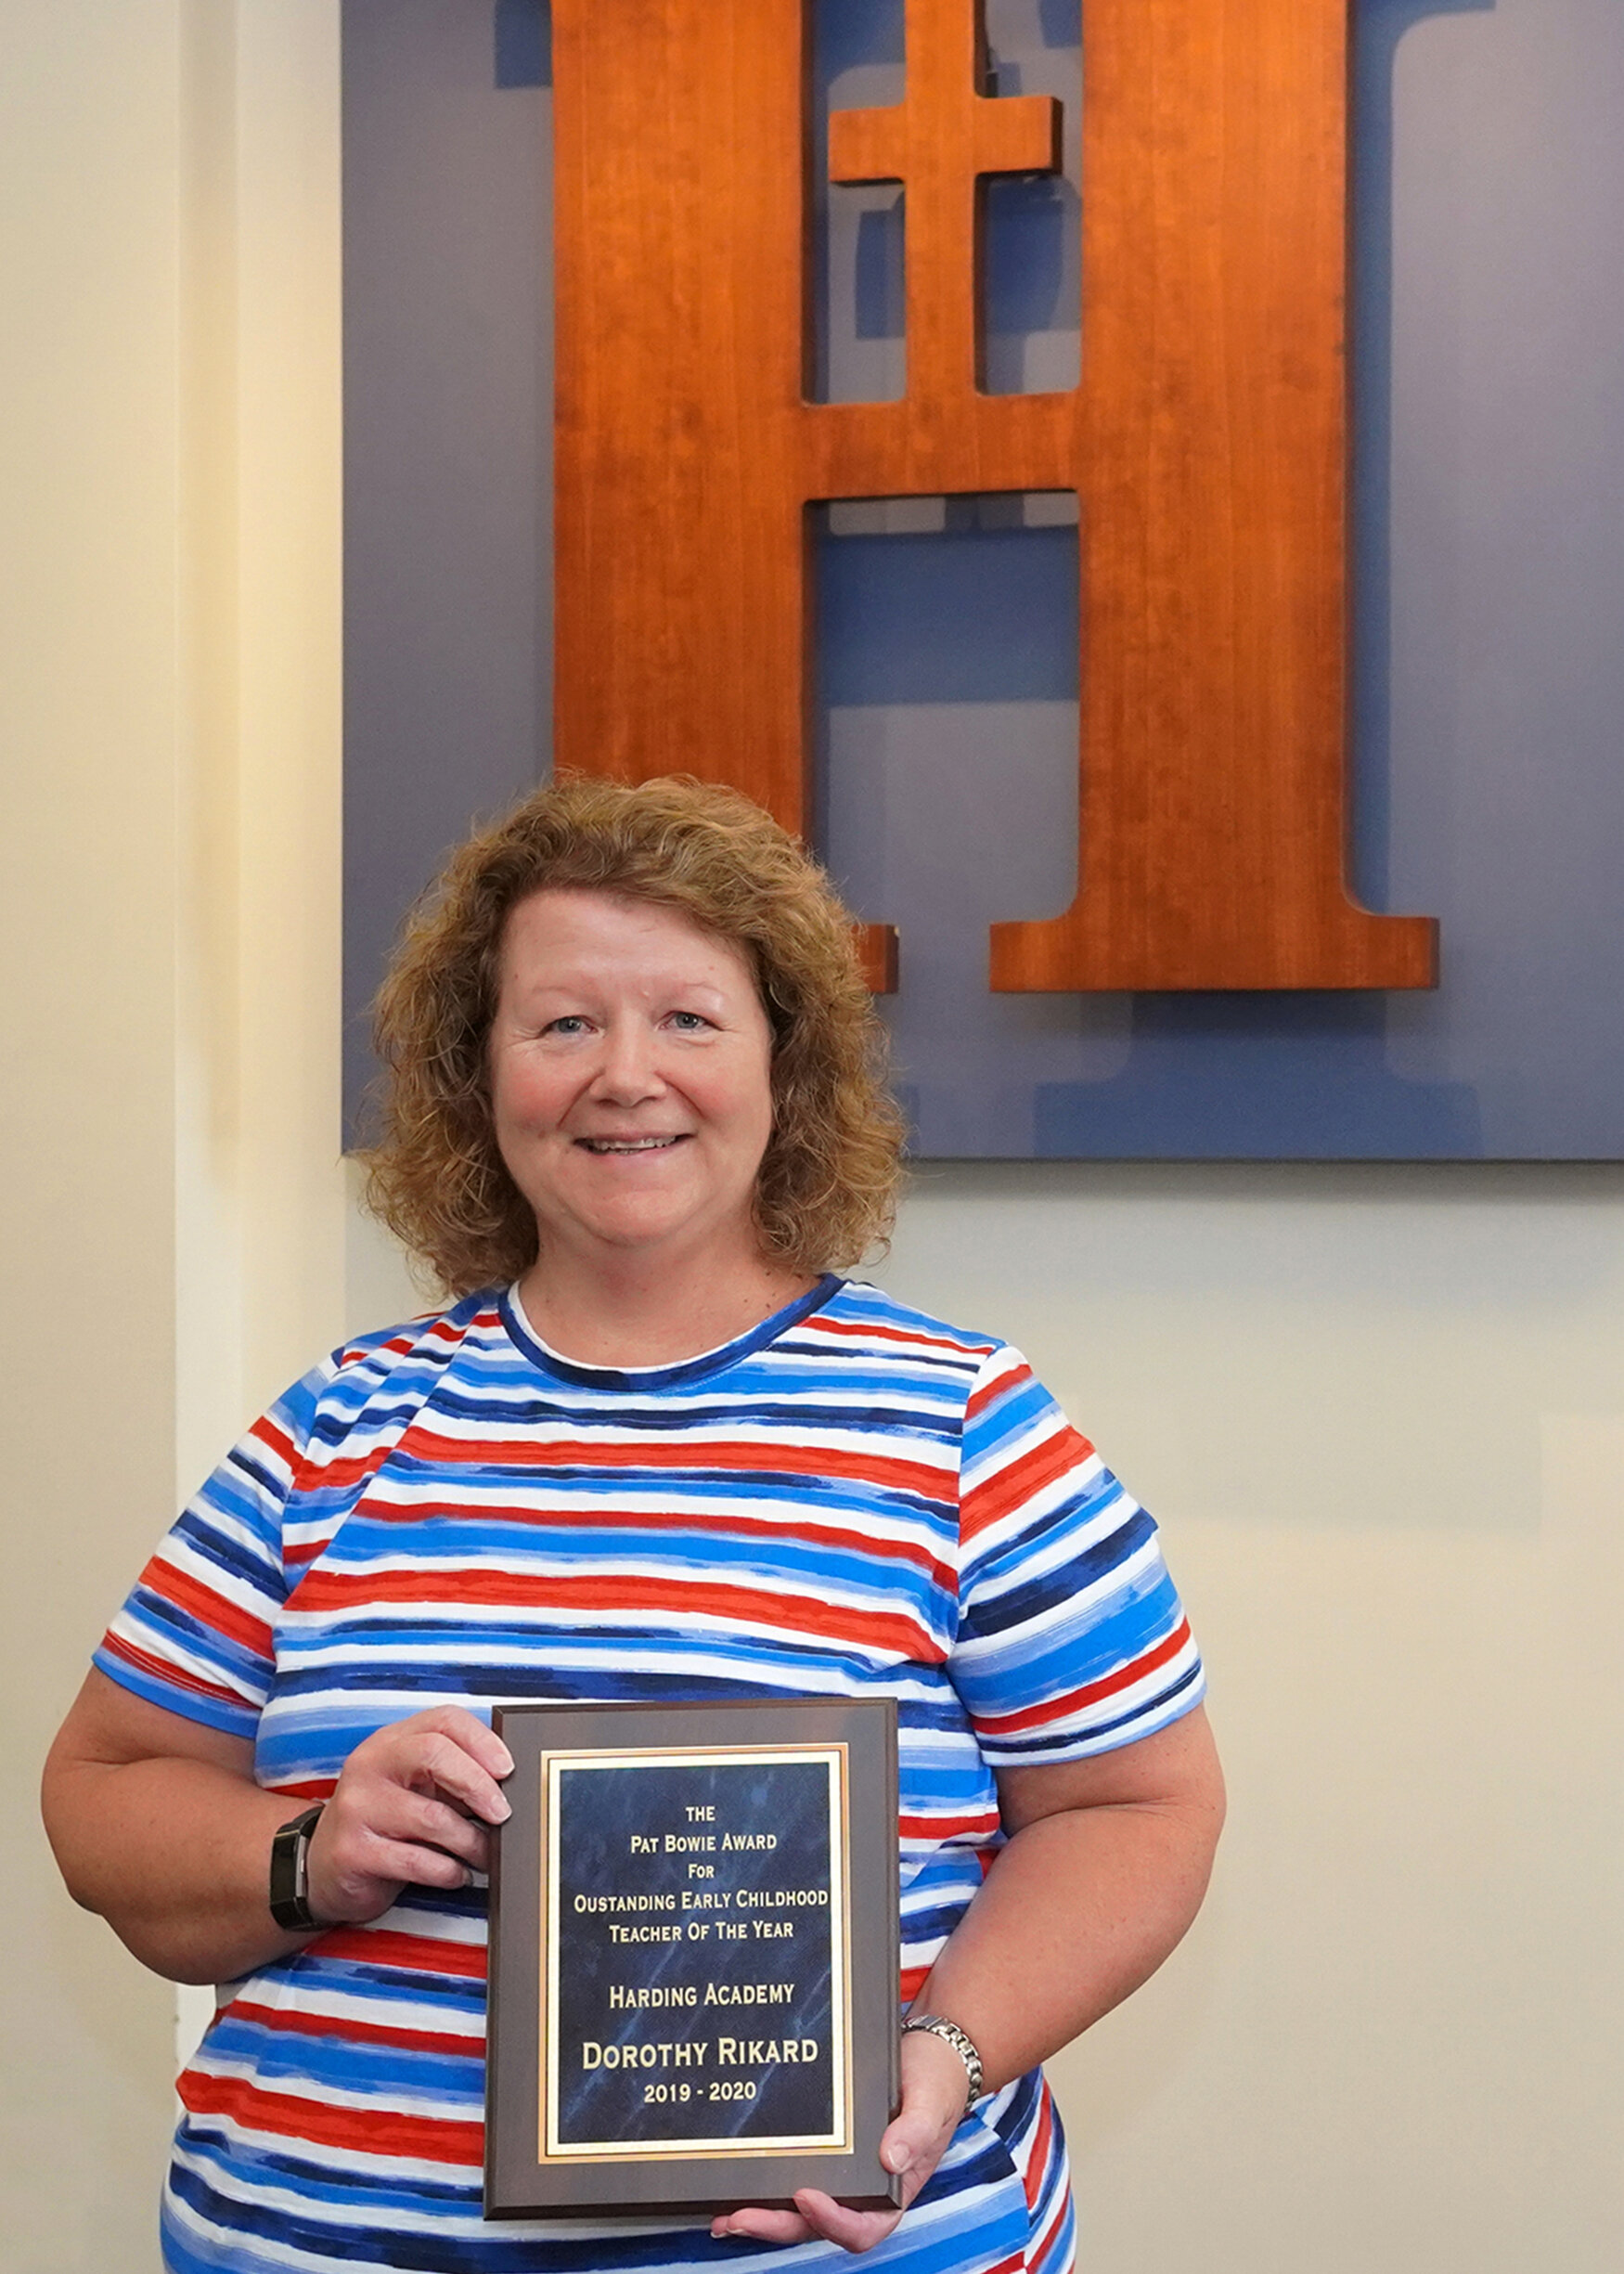 Dorothy Rikard—The Pat Bowie Award for Outstanding Early Childhood Teacher of the Year